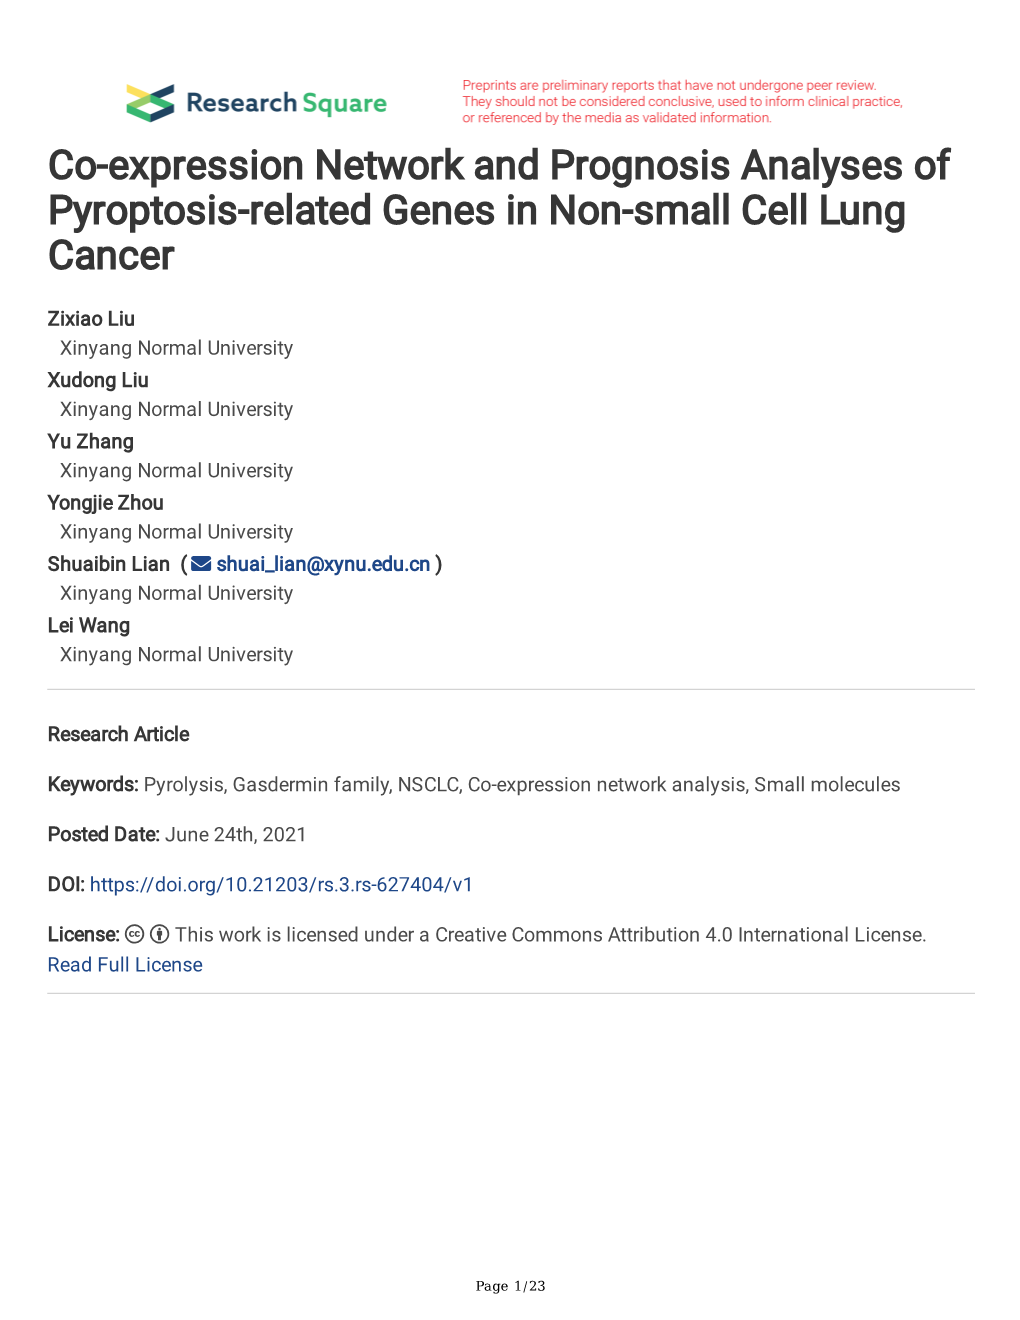 Co-Expression Network and Prognosis Analyses of Pyroptosis-Related Genes in Non-Small Cell Lung Cancer